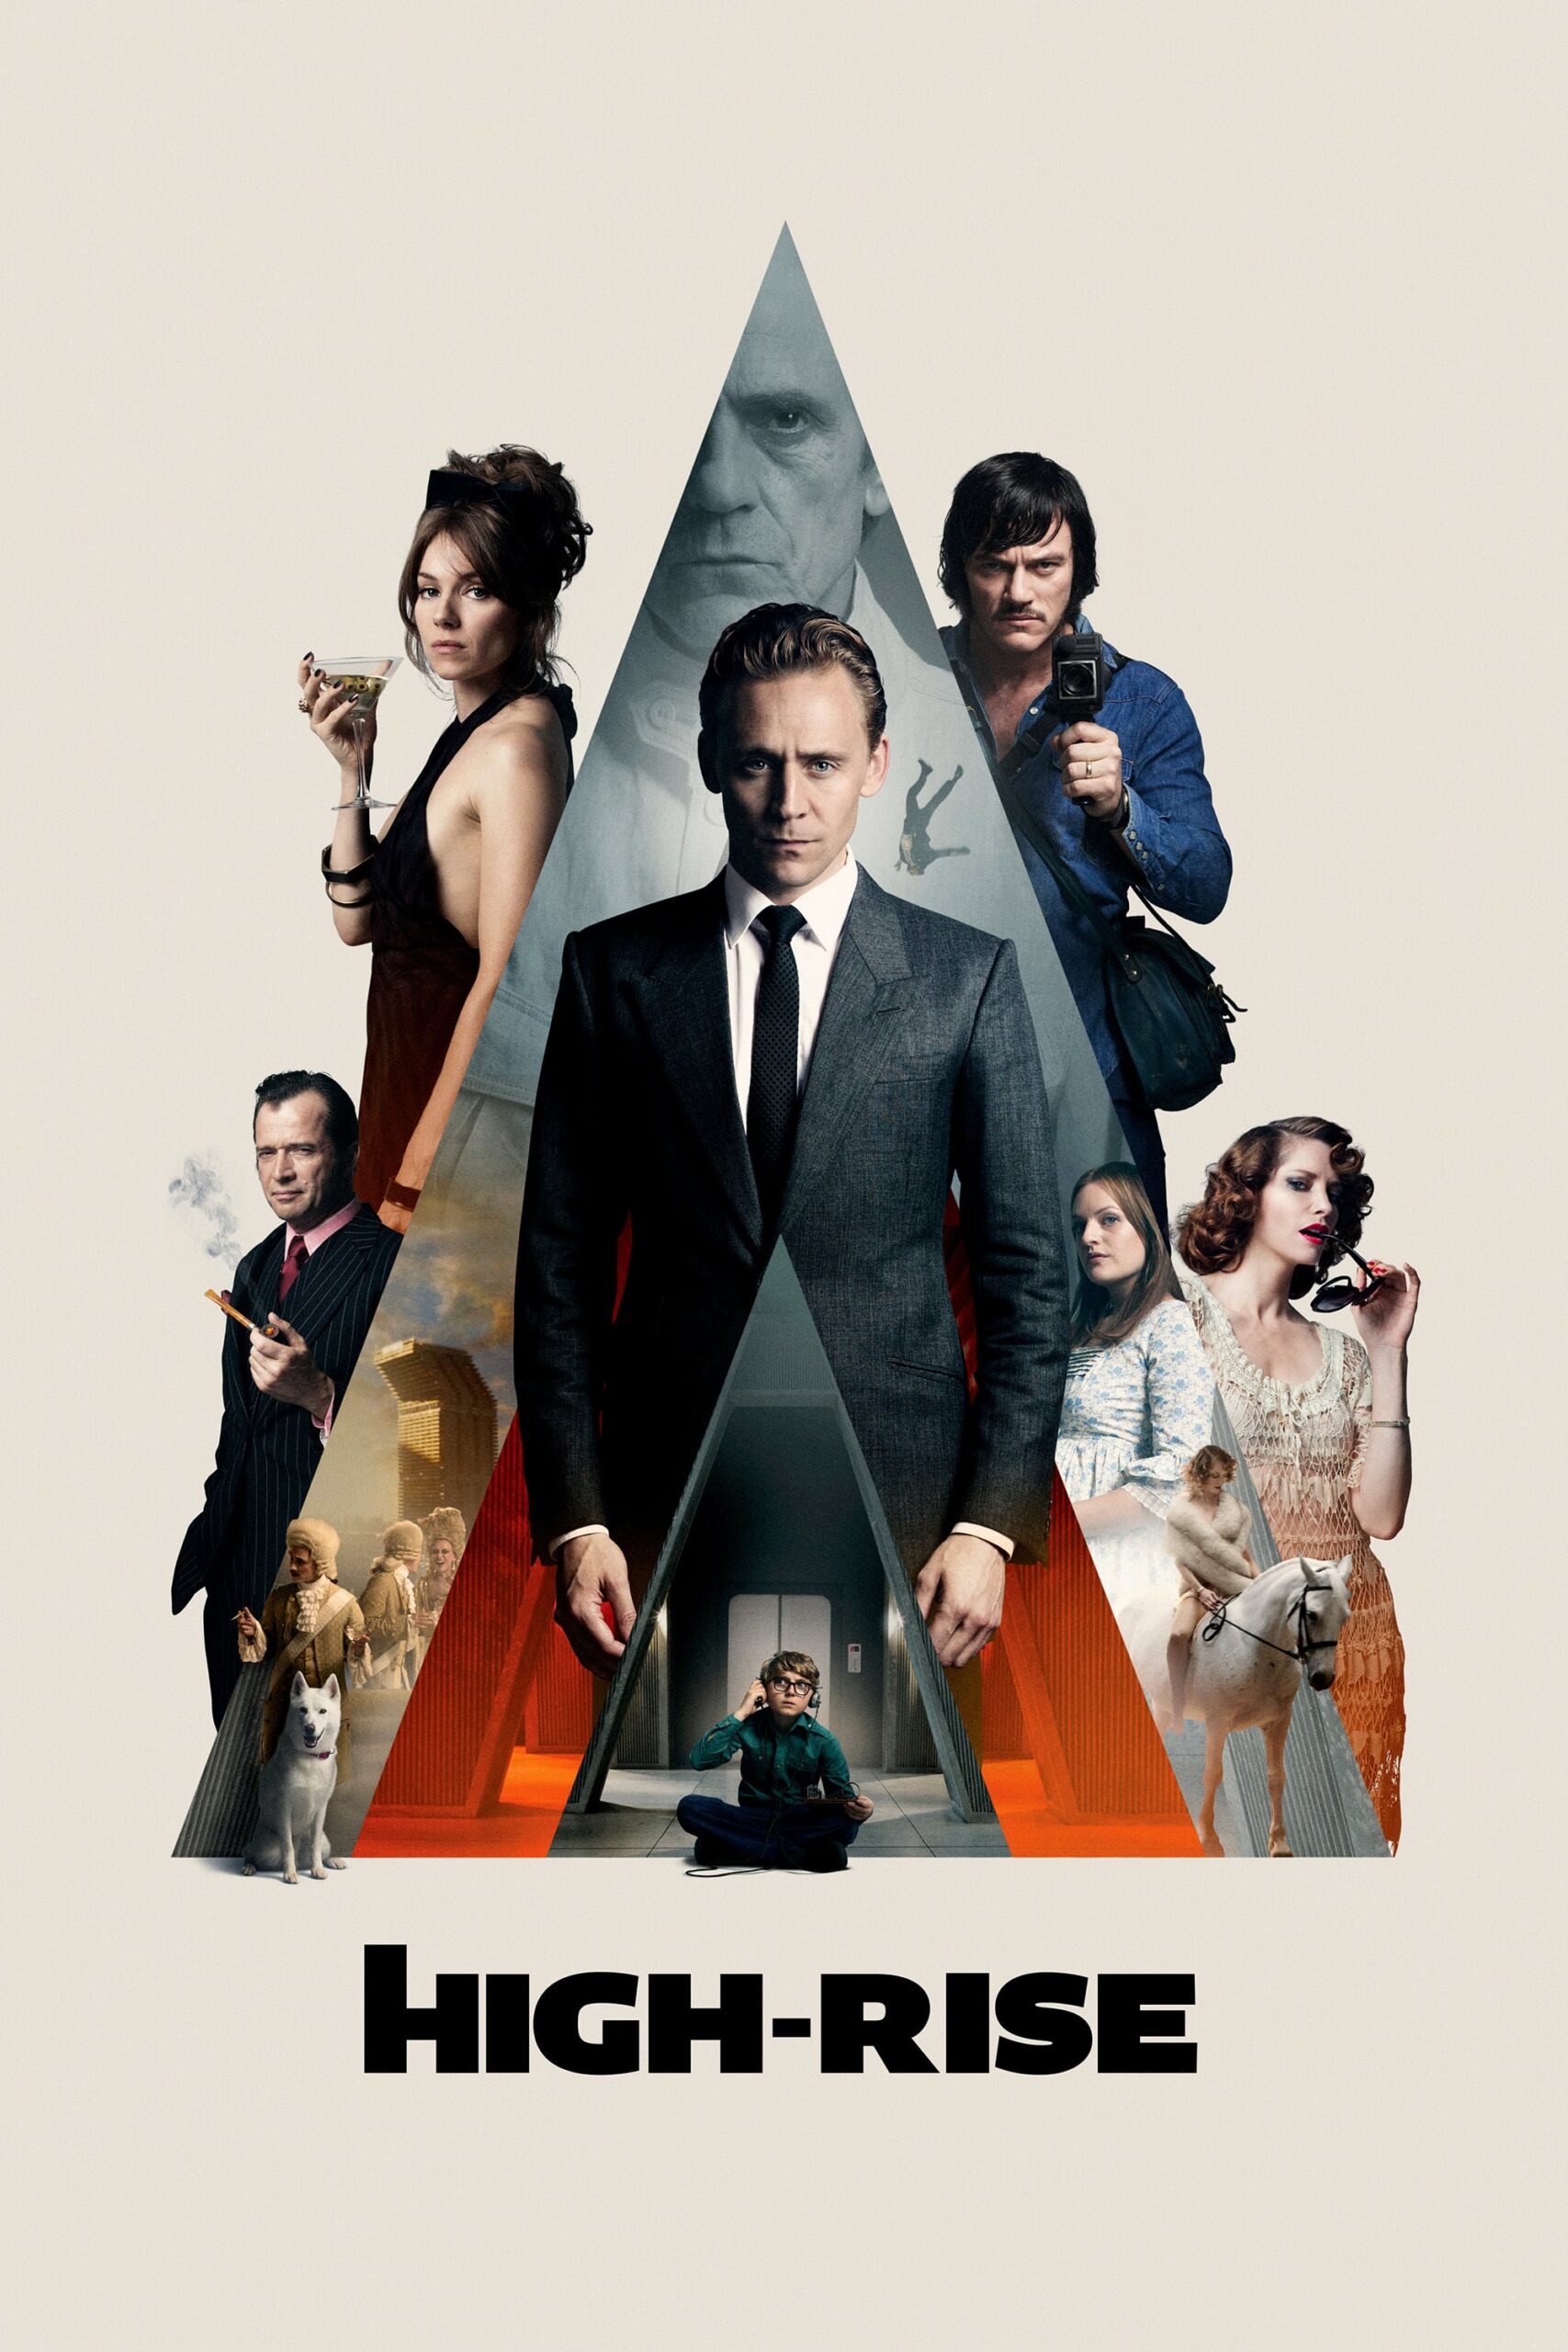 Poster for the movie "High-Rise"